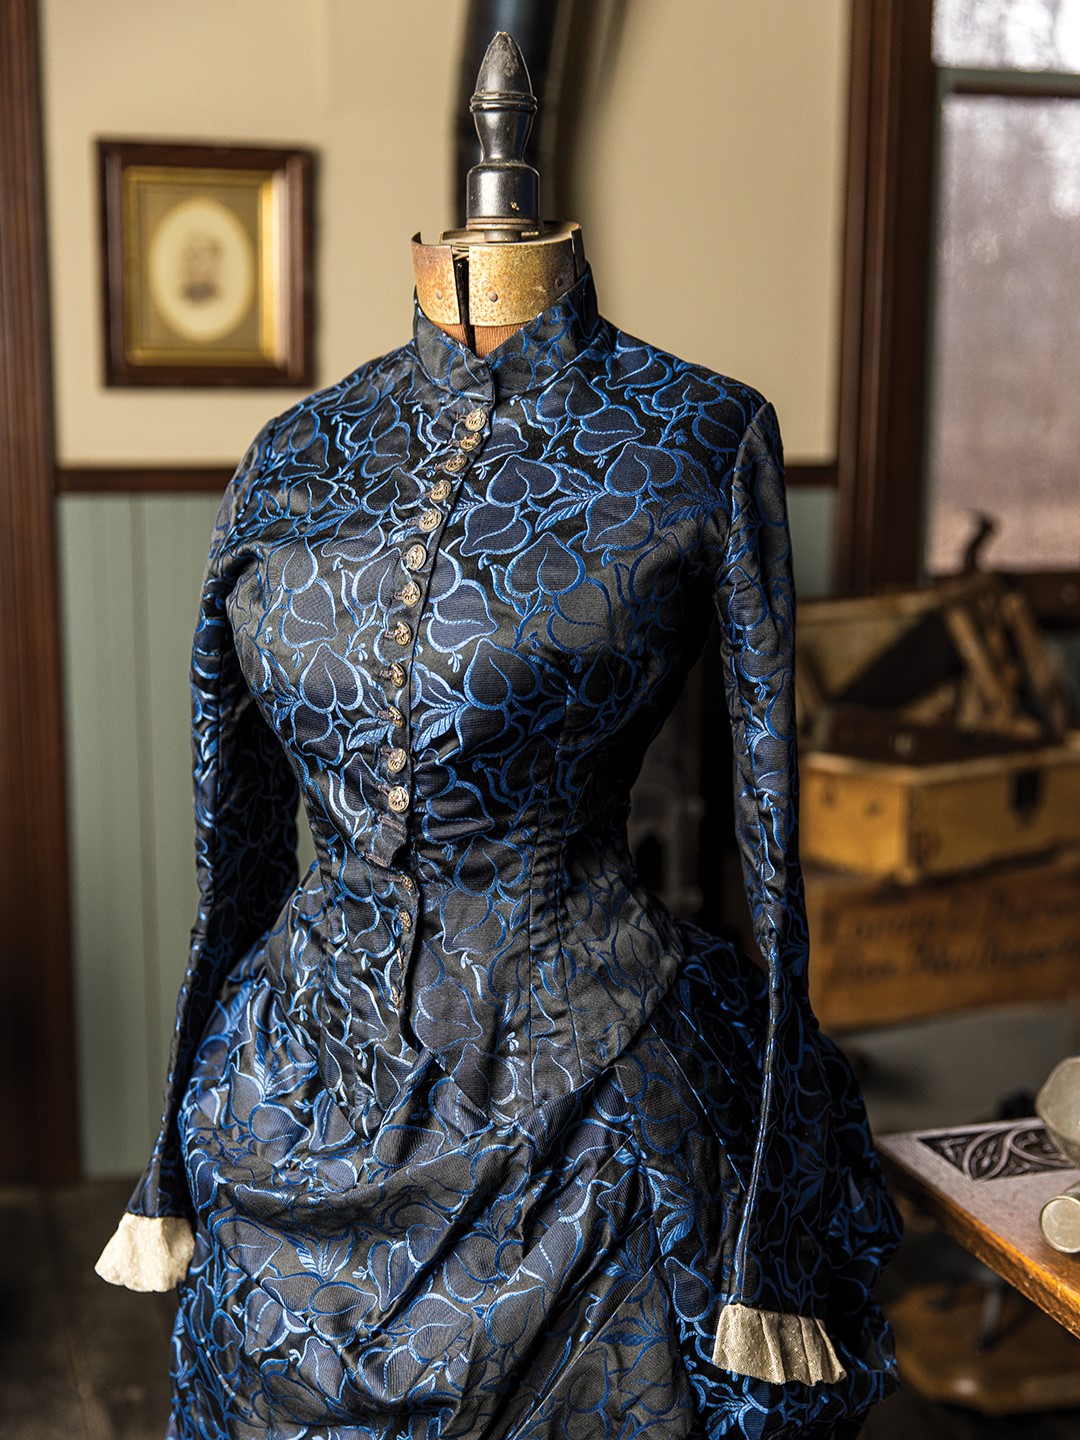 A bustle dress, estimated to be from the 1880s, was donated to the City of Minnetonka Historical Society by Pati Kortum in 2020.